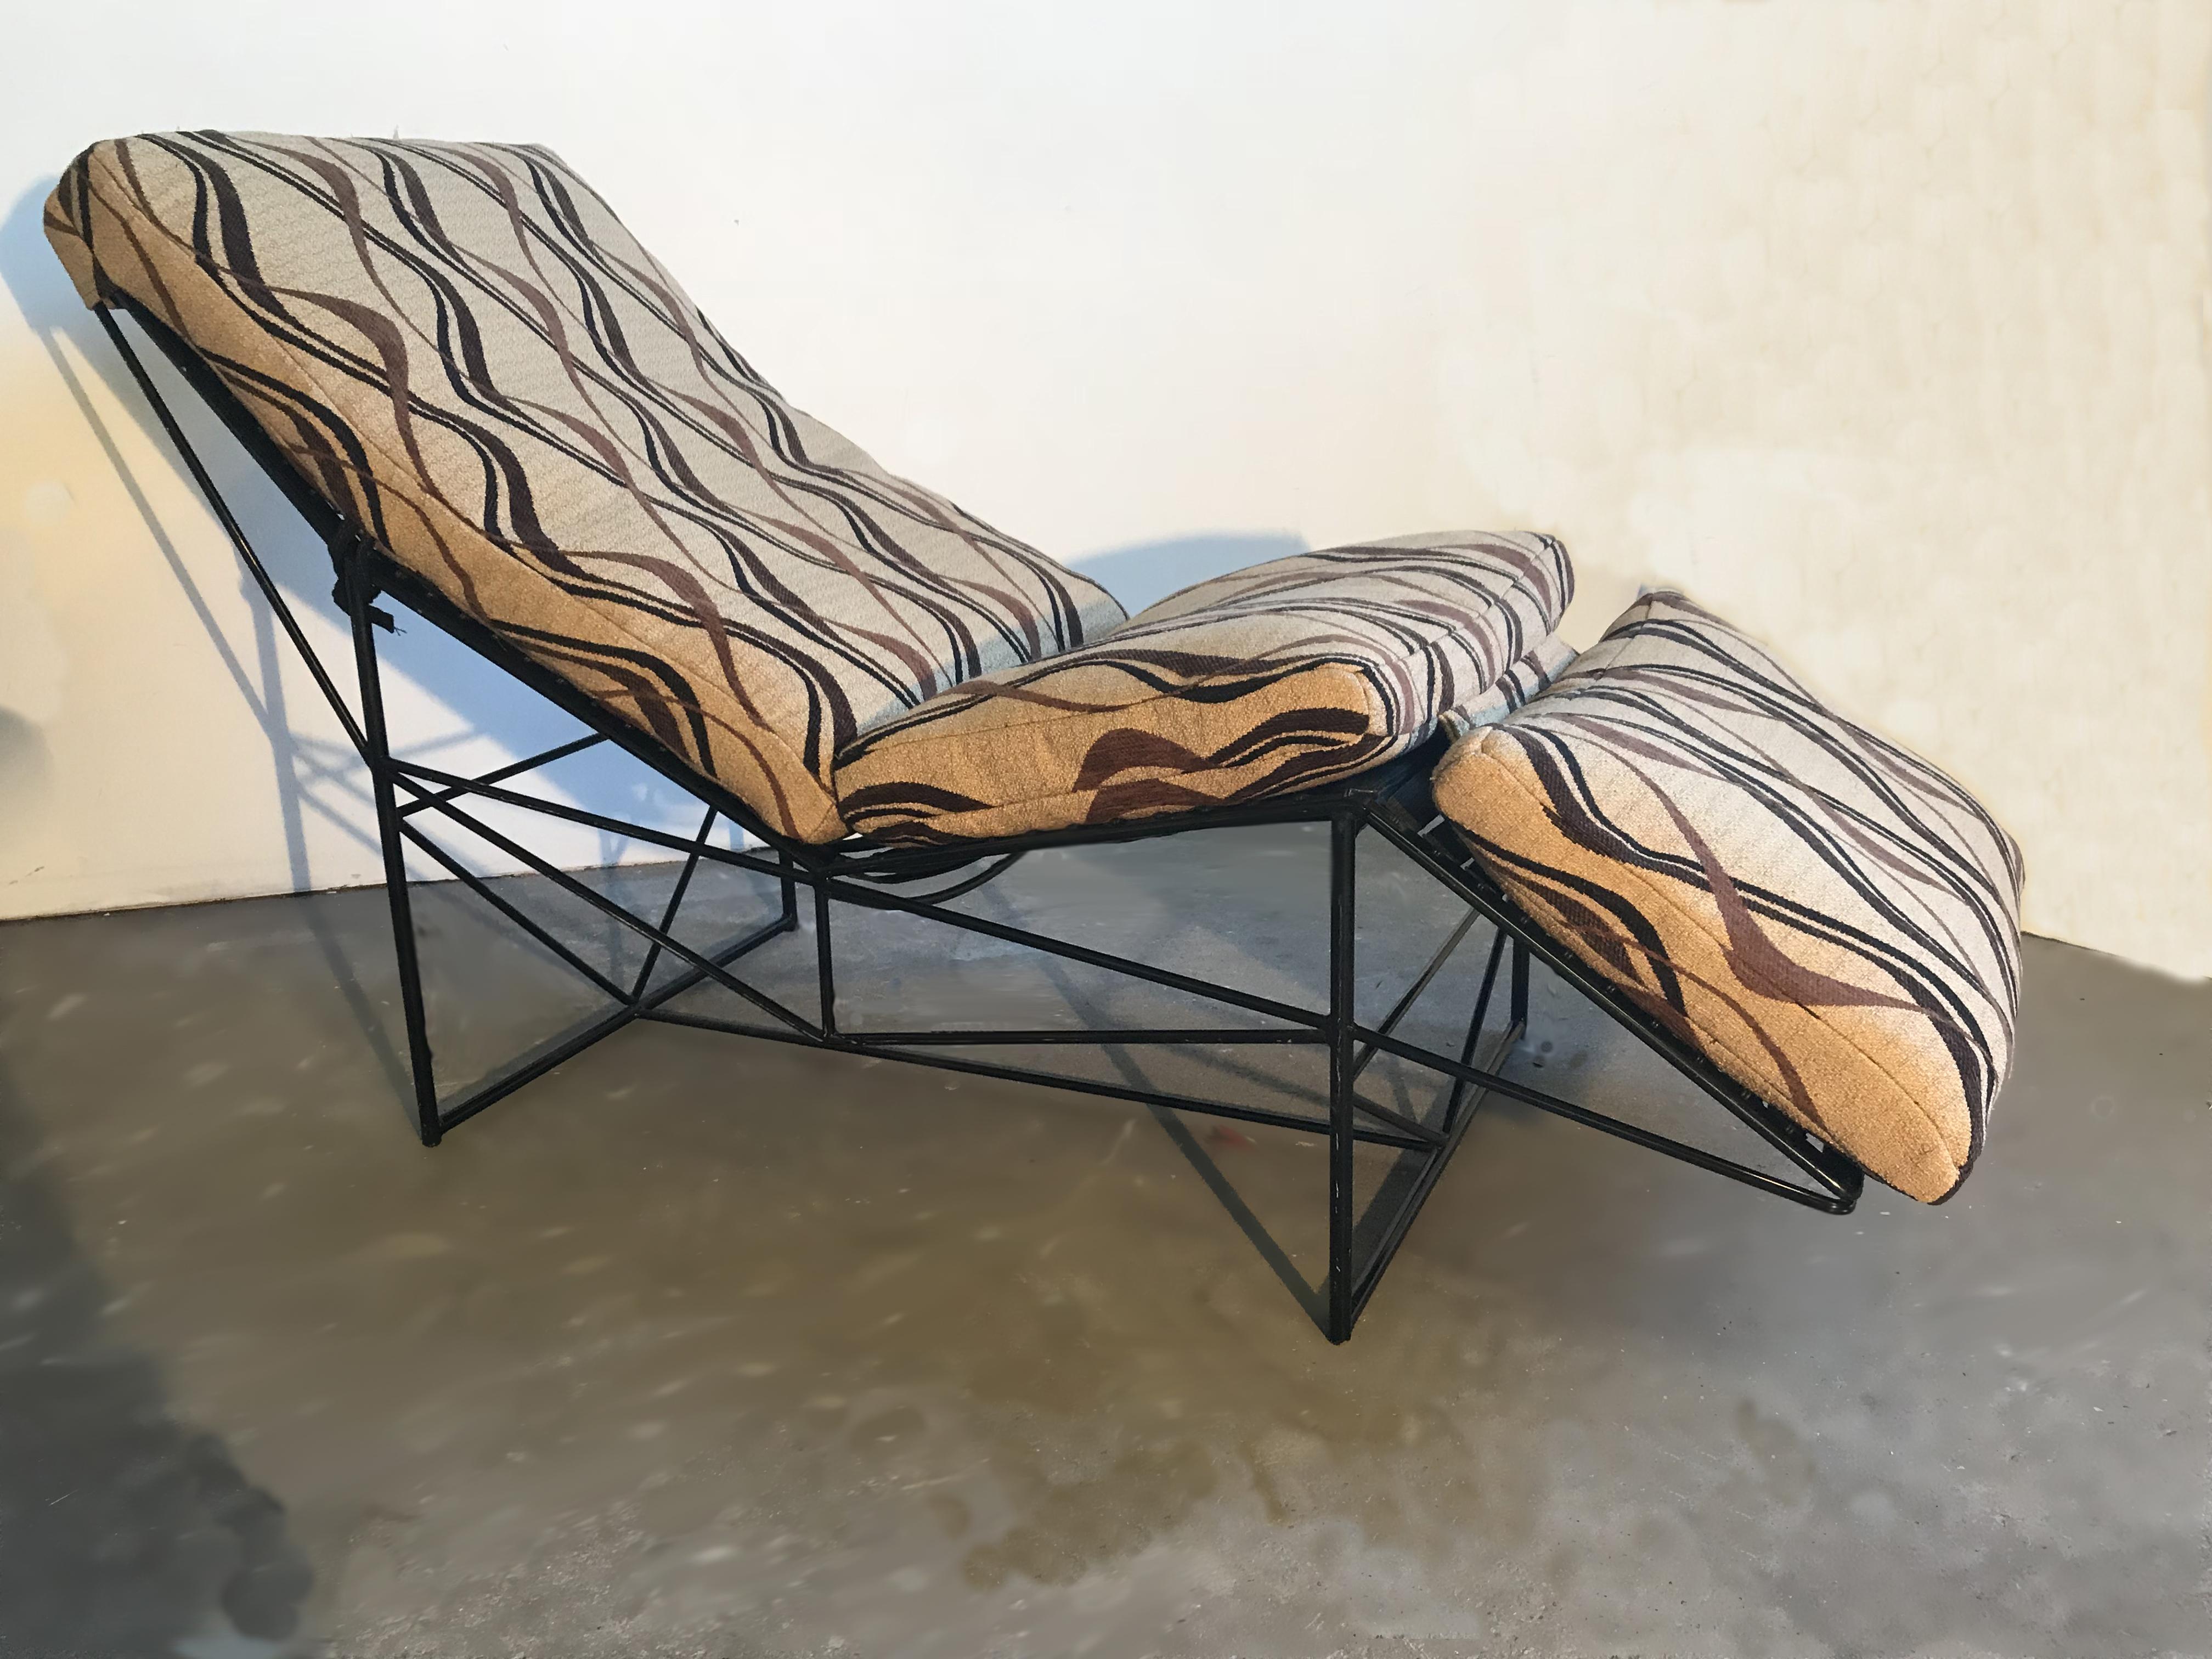 Sculptural Chaise Lounge by Paolo Passerini, 1985 (Metall)